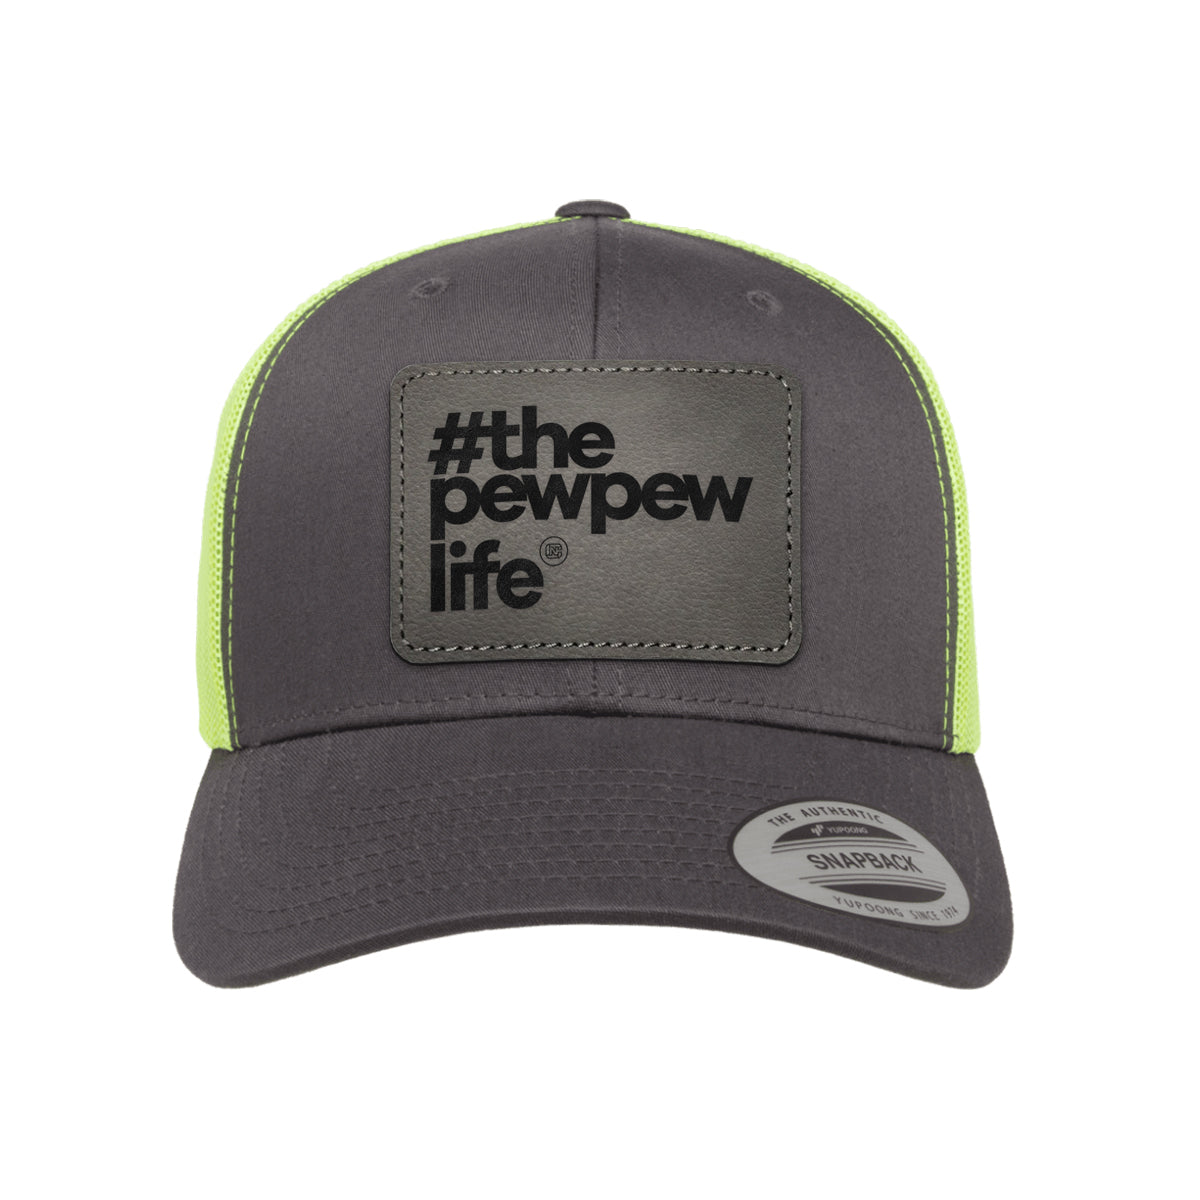 #ThePewPewLife Leather Patch Trucker Hat